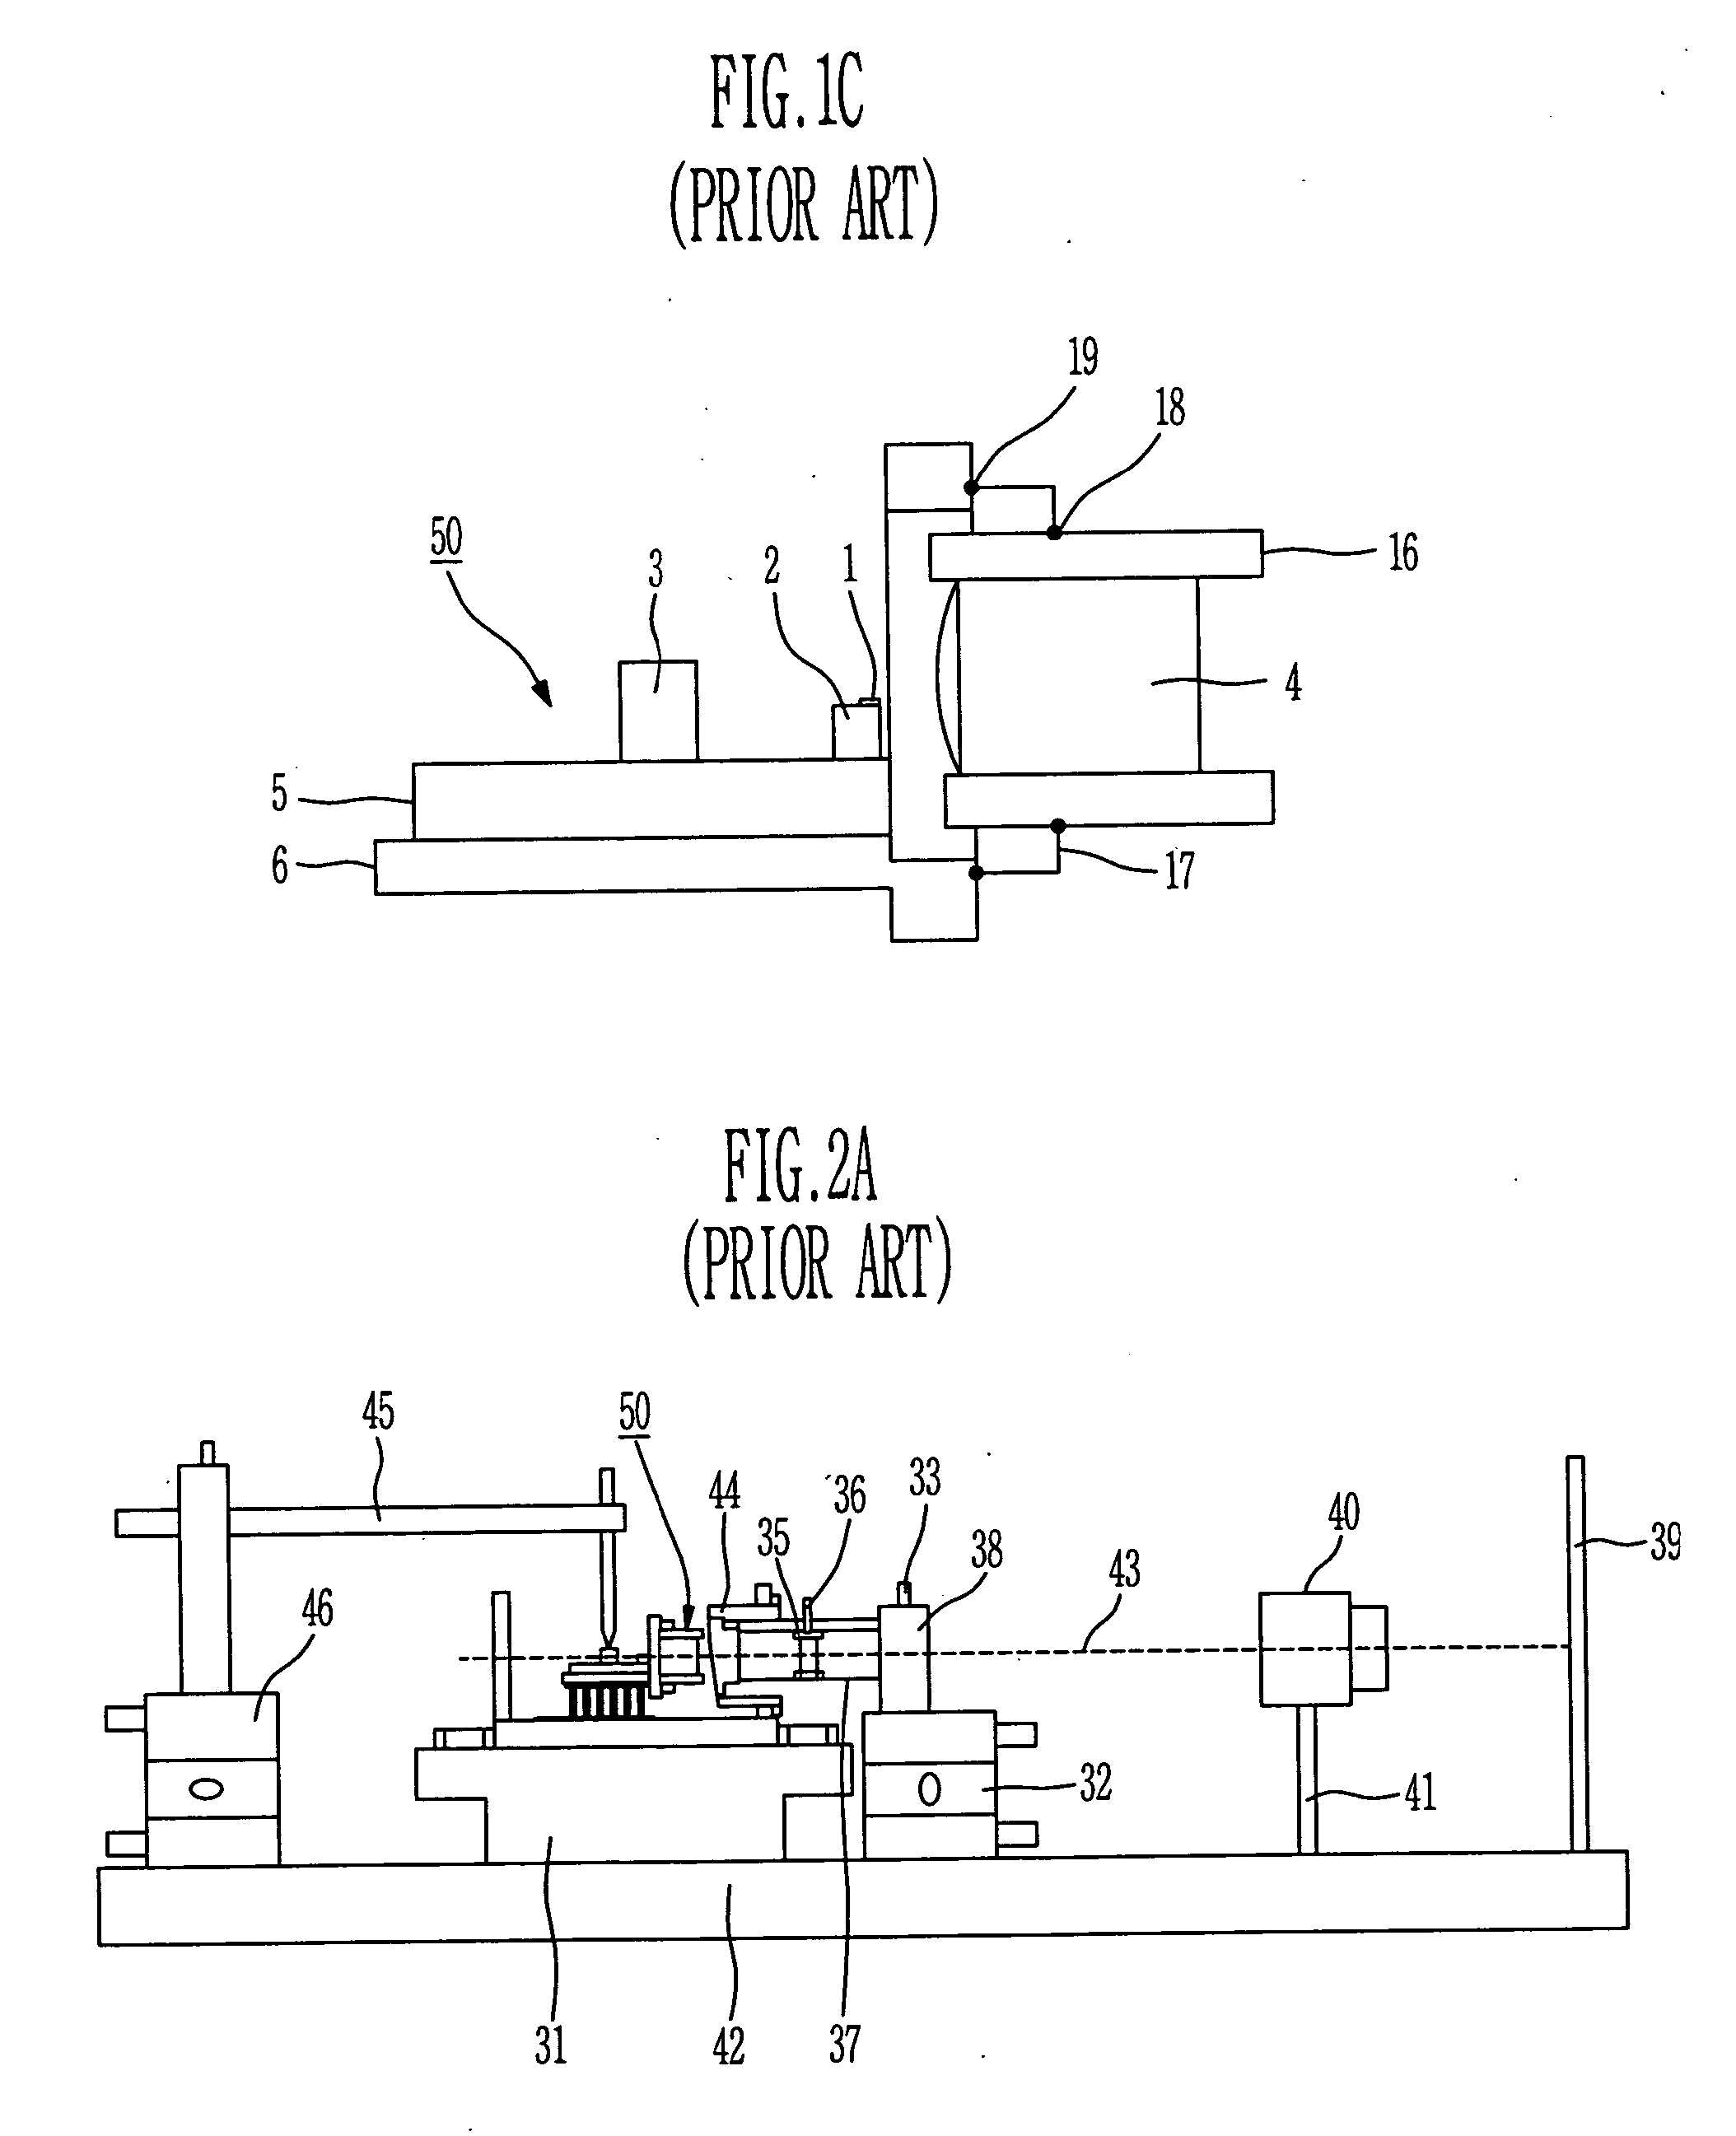 Collimating detection apparatus and optical module packaging apparatus using the same